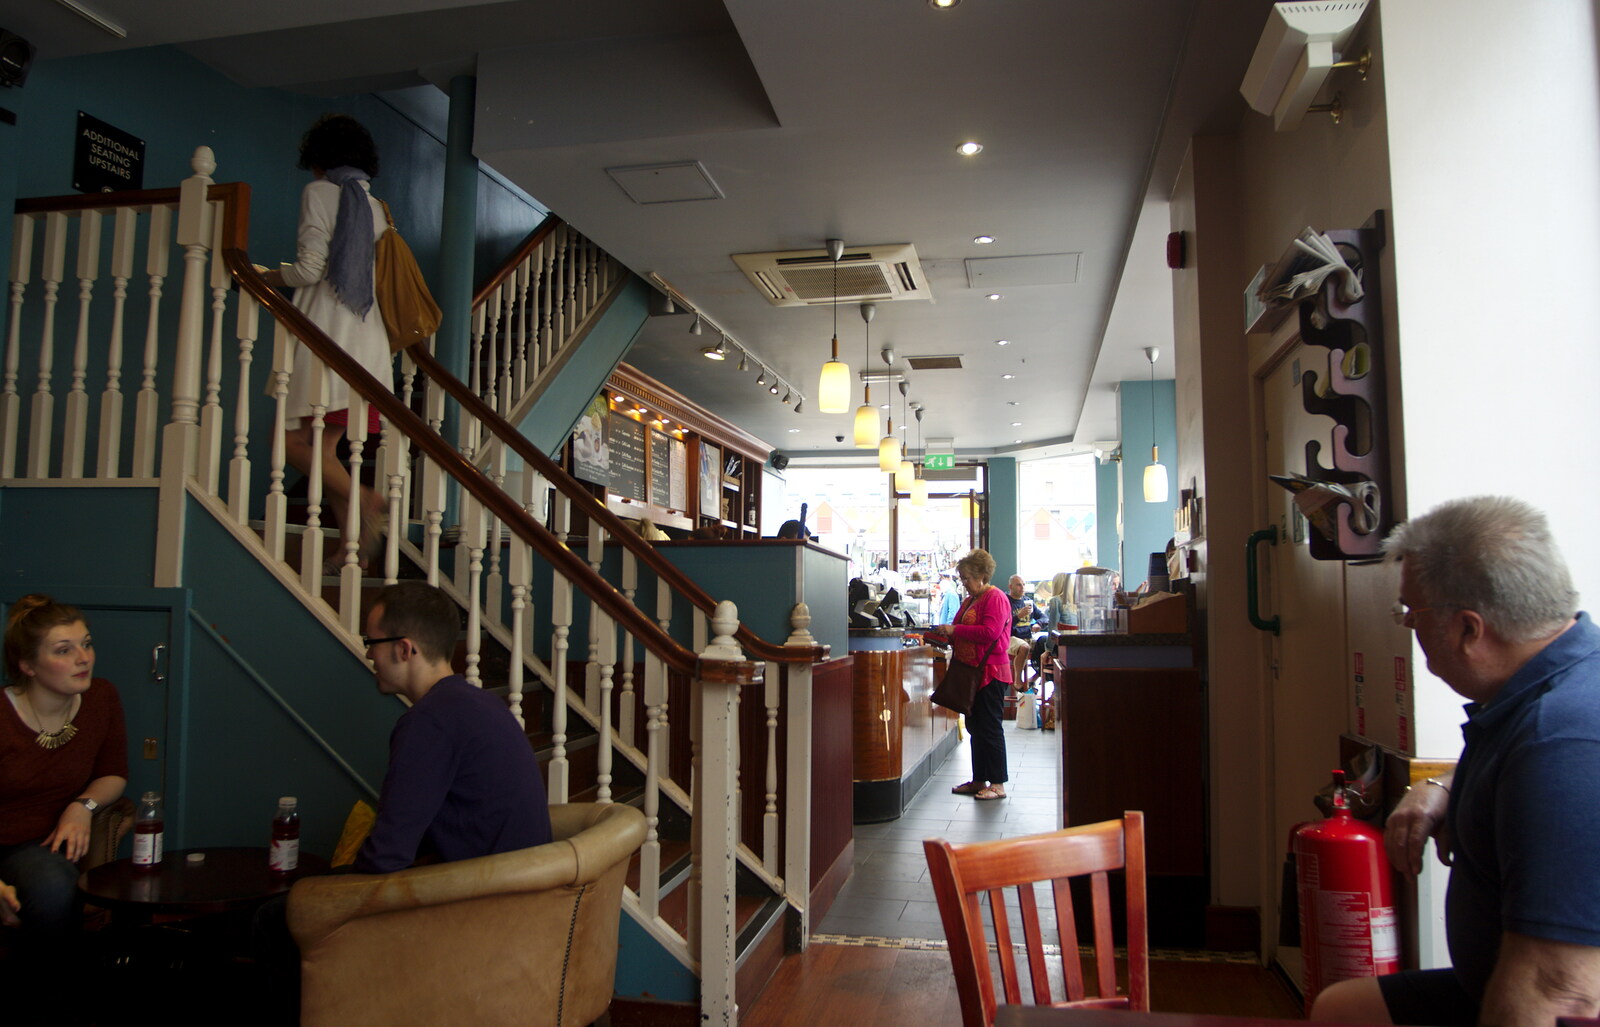 Inside Norwich's Café Nero from Sis and Matt Visit, Suffolk and Norfolk - 31st May 2014